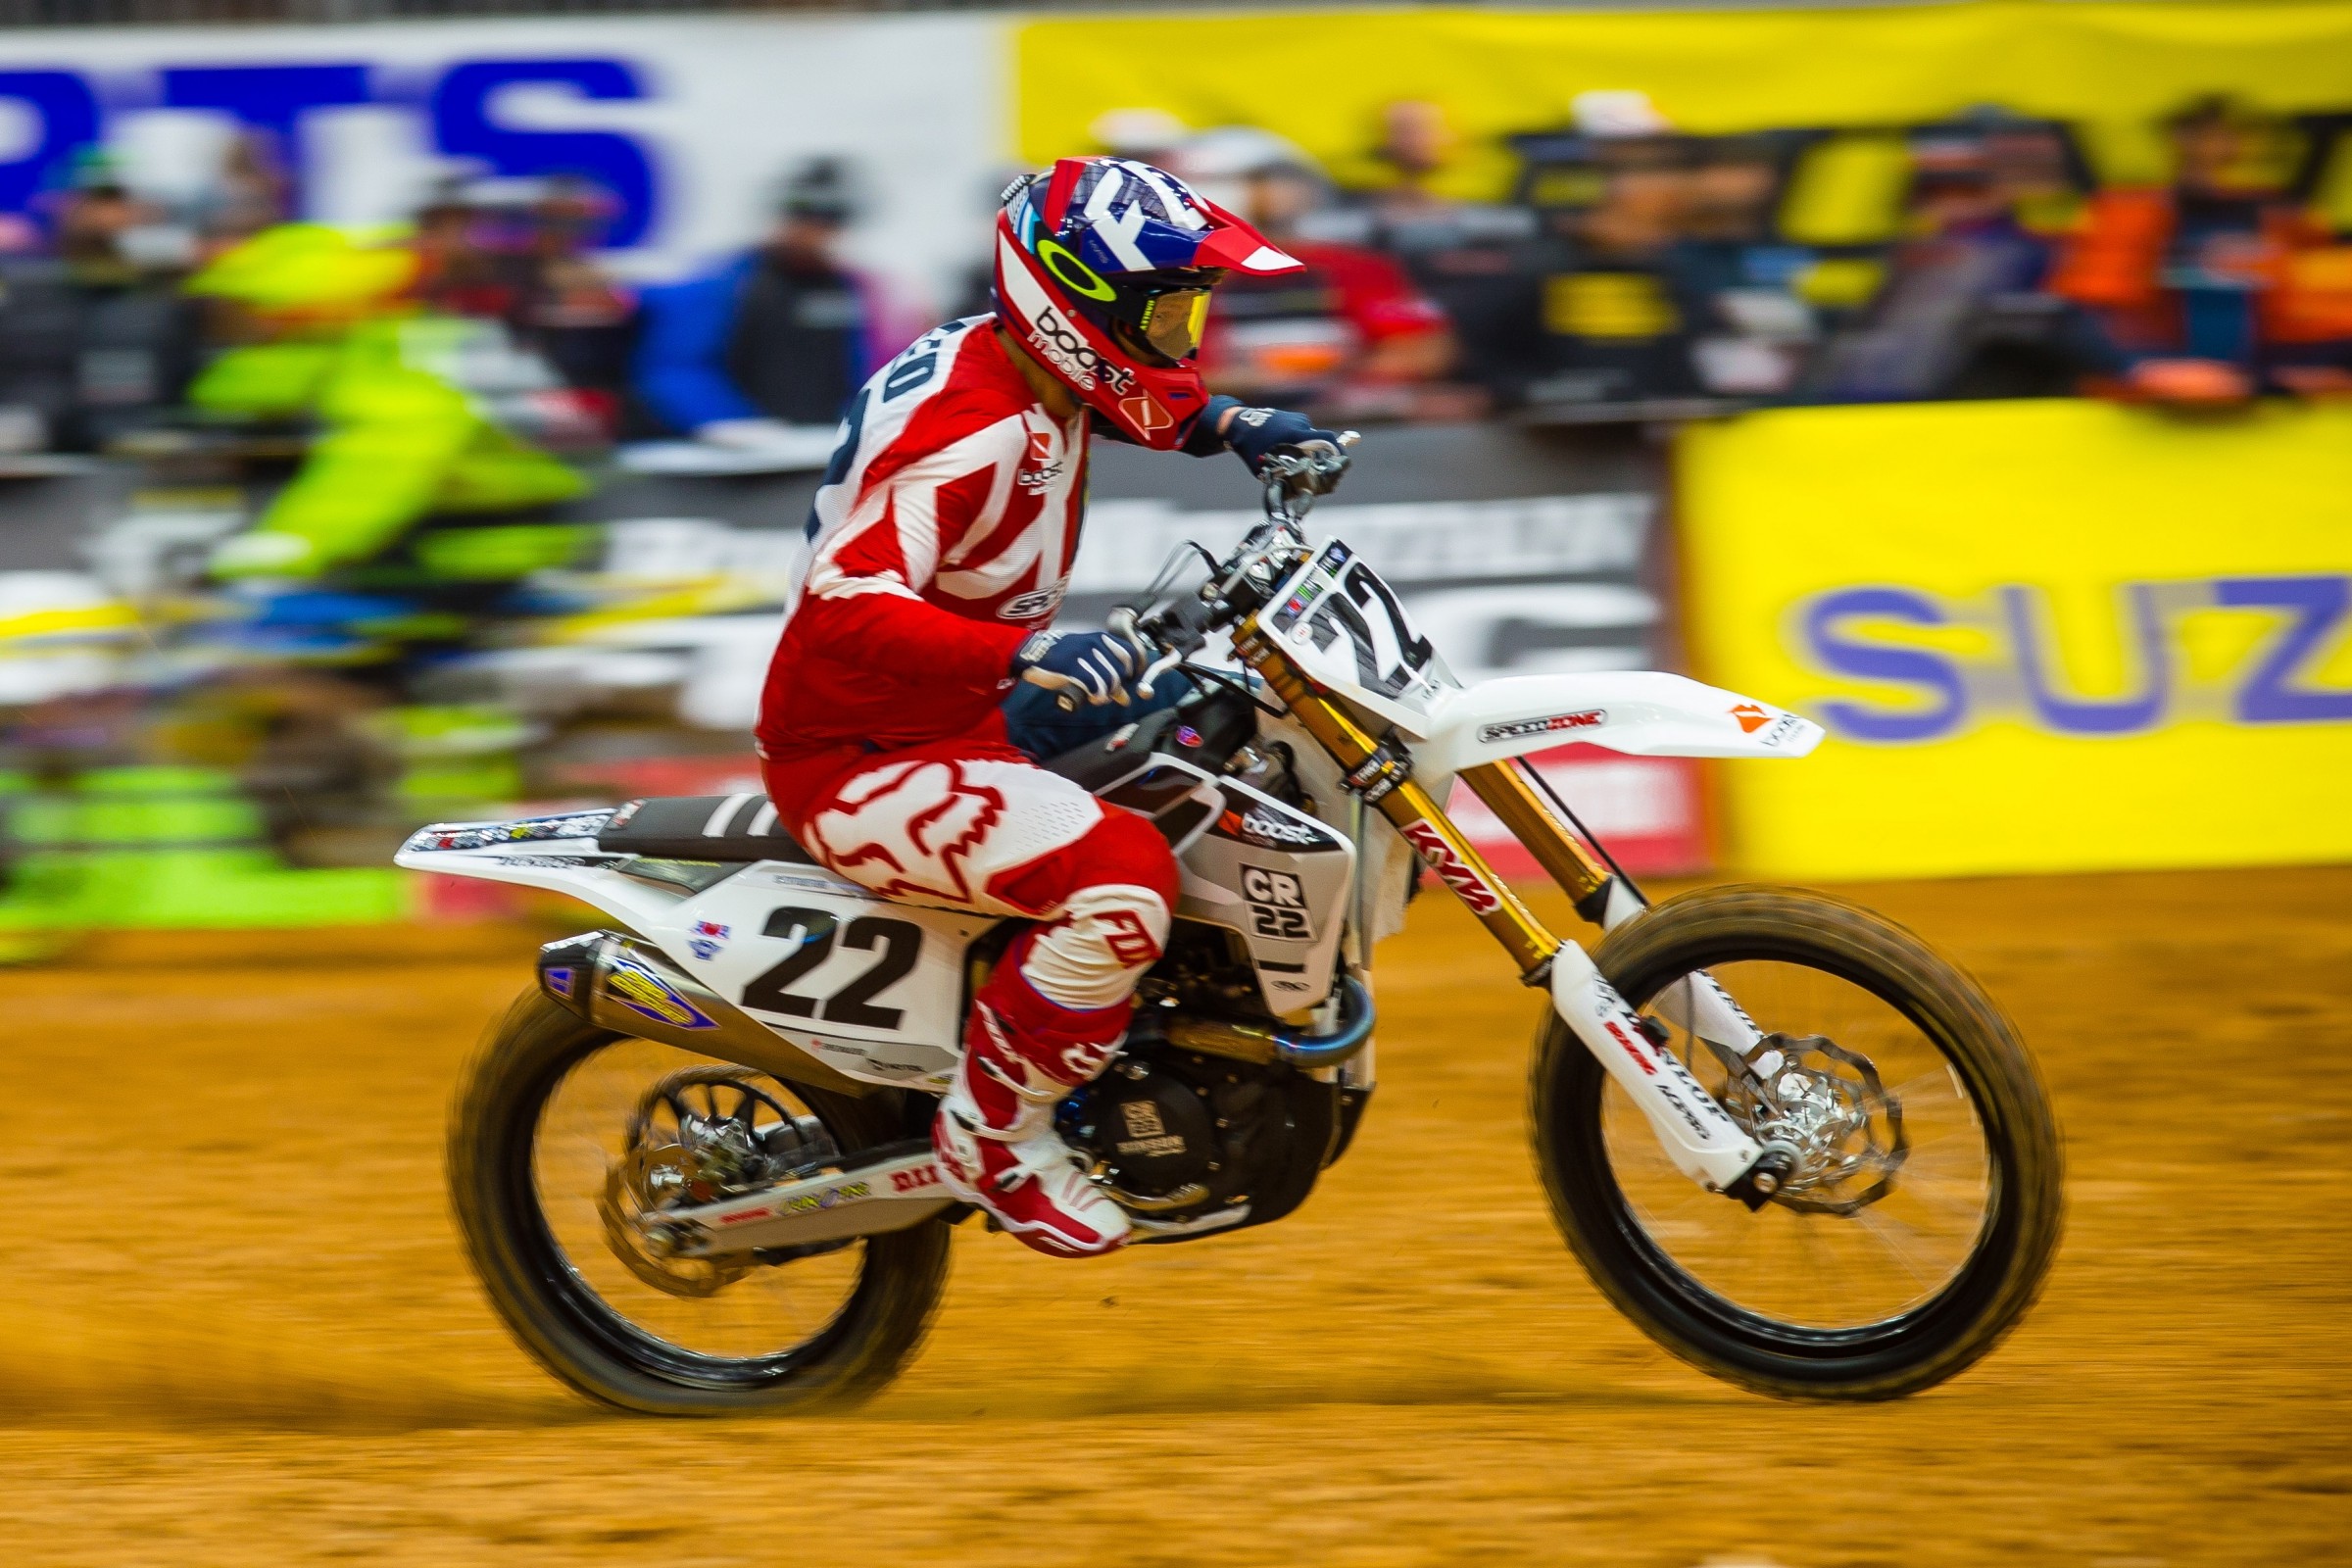 Chad Reed's 2018 SX Season: Going According to Plan? - Racer X